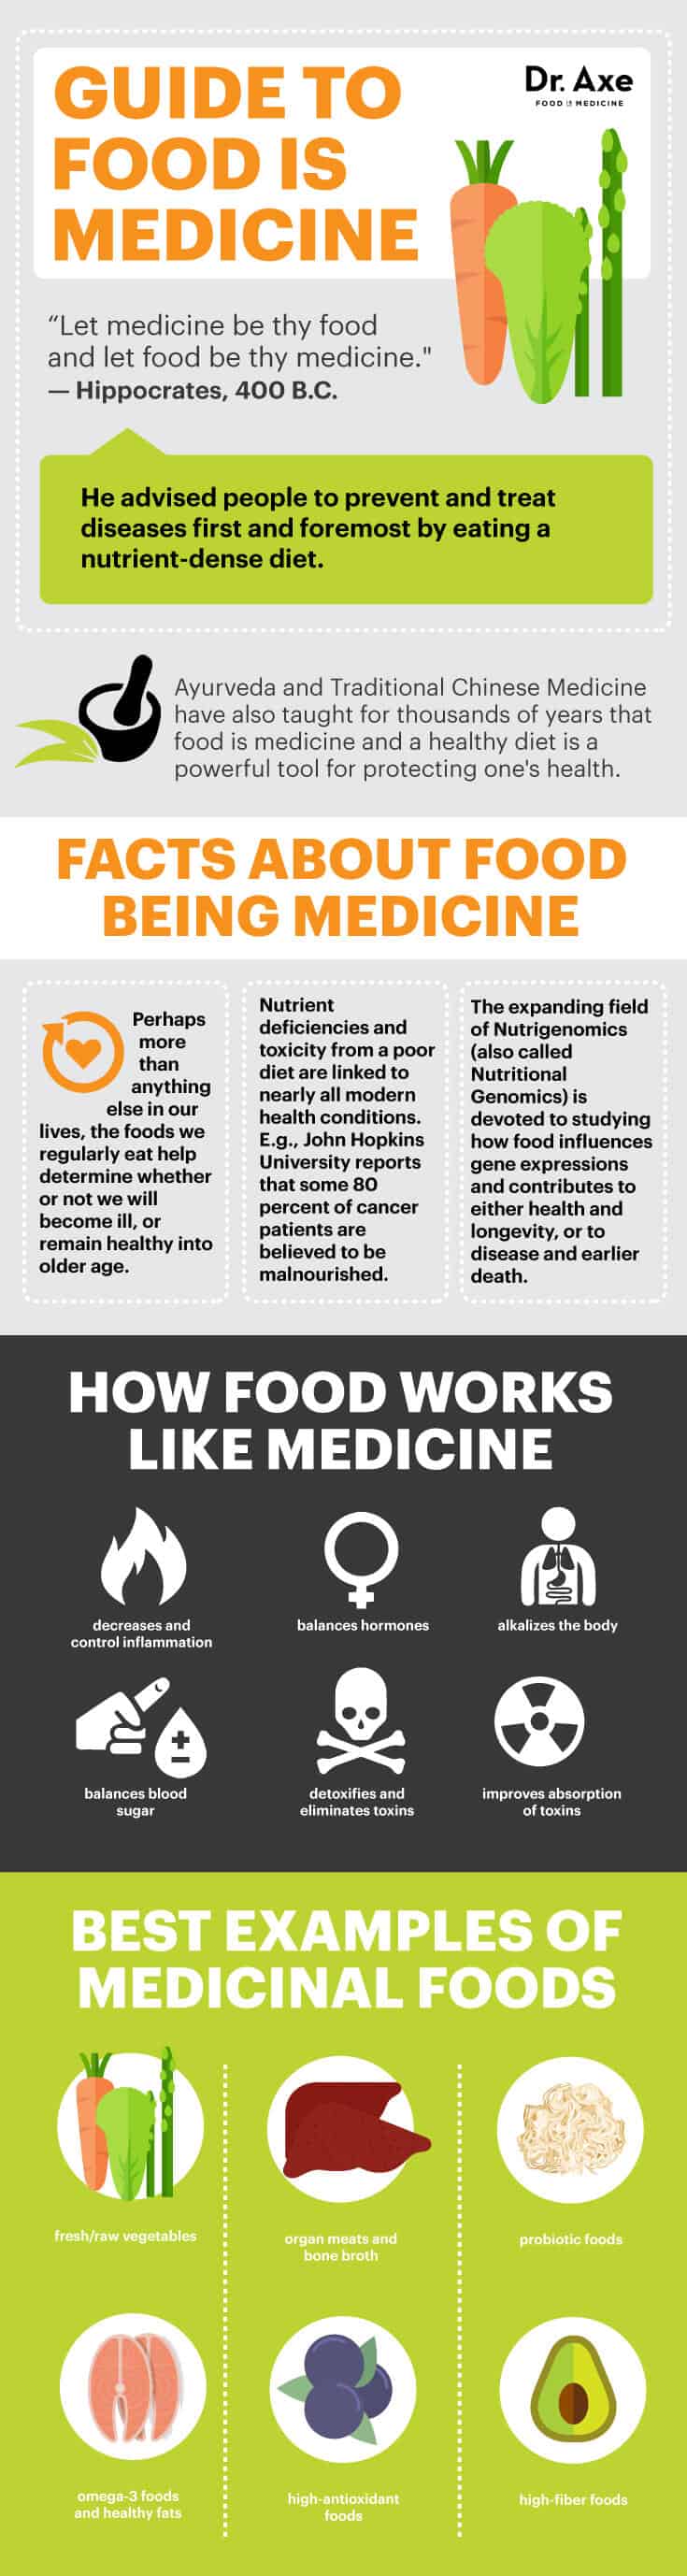 Food is medicine guide - Dr. Axe